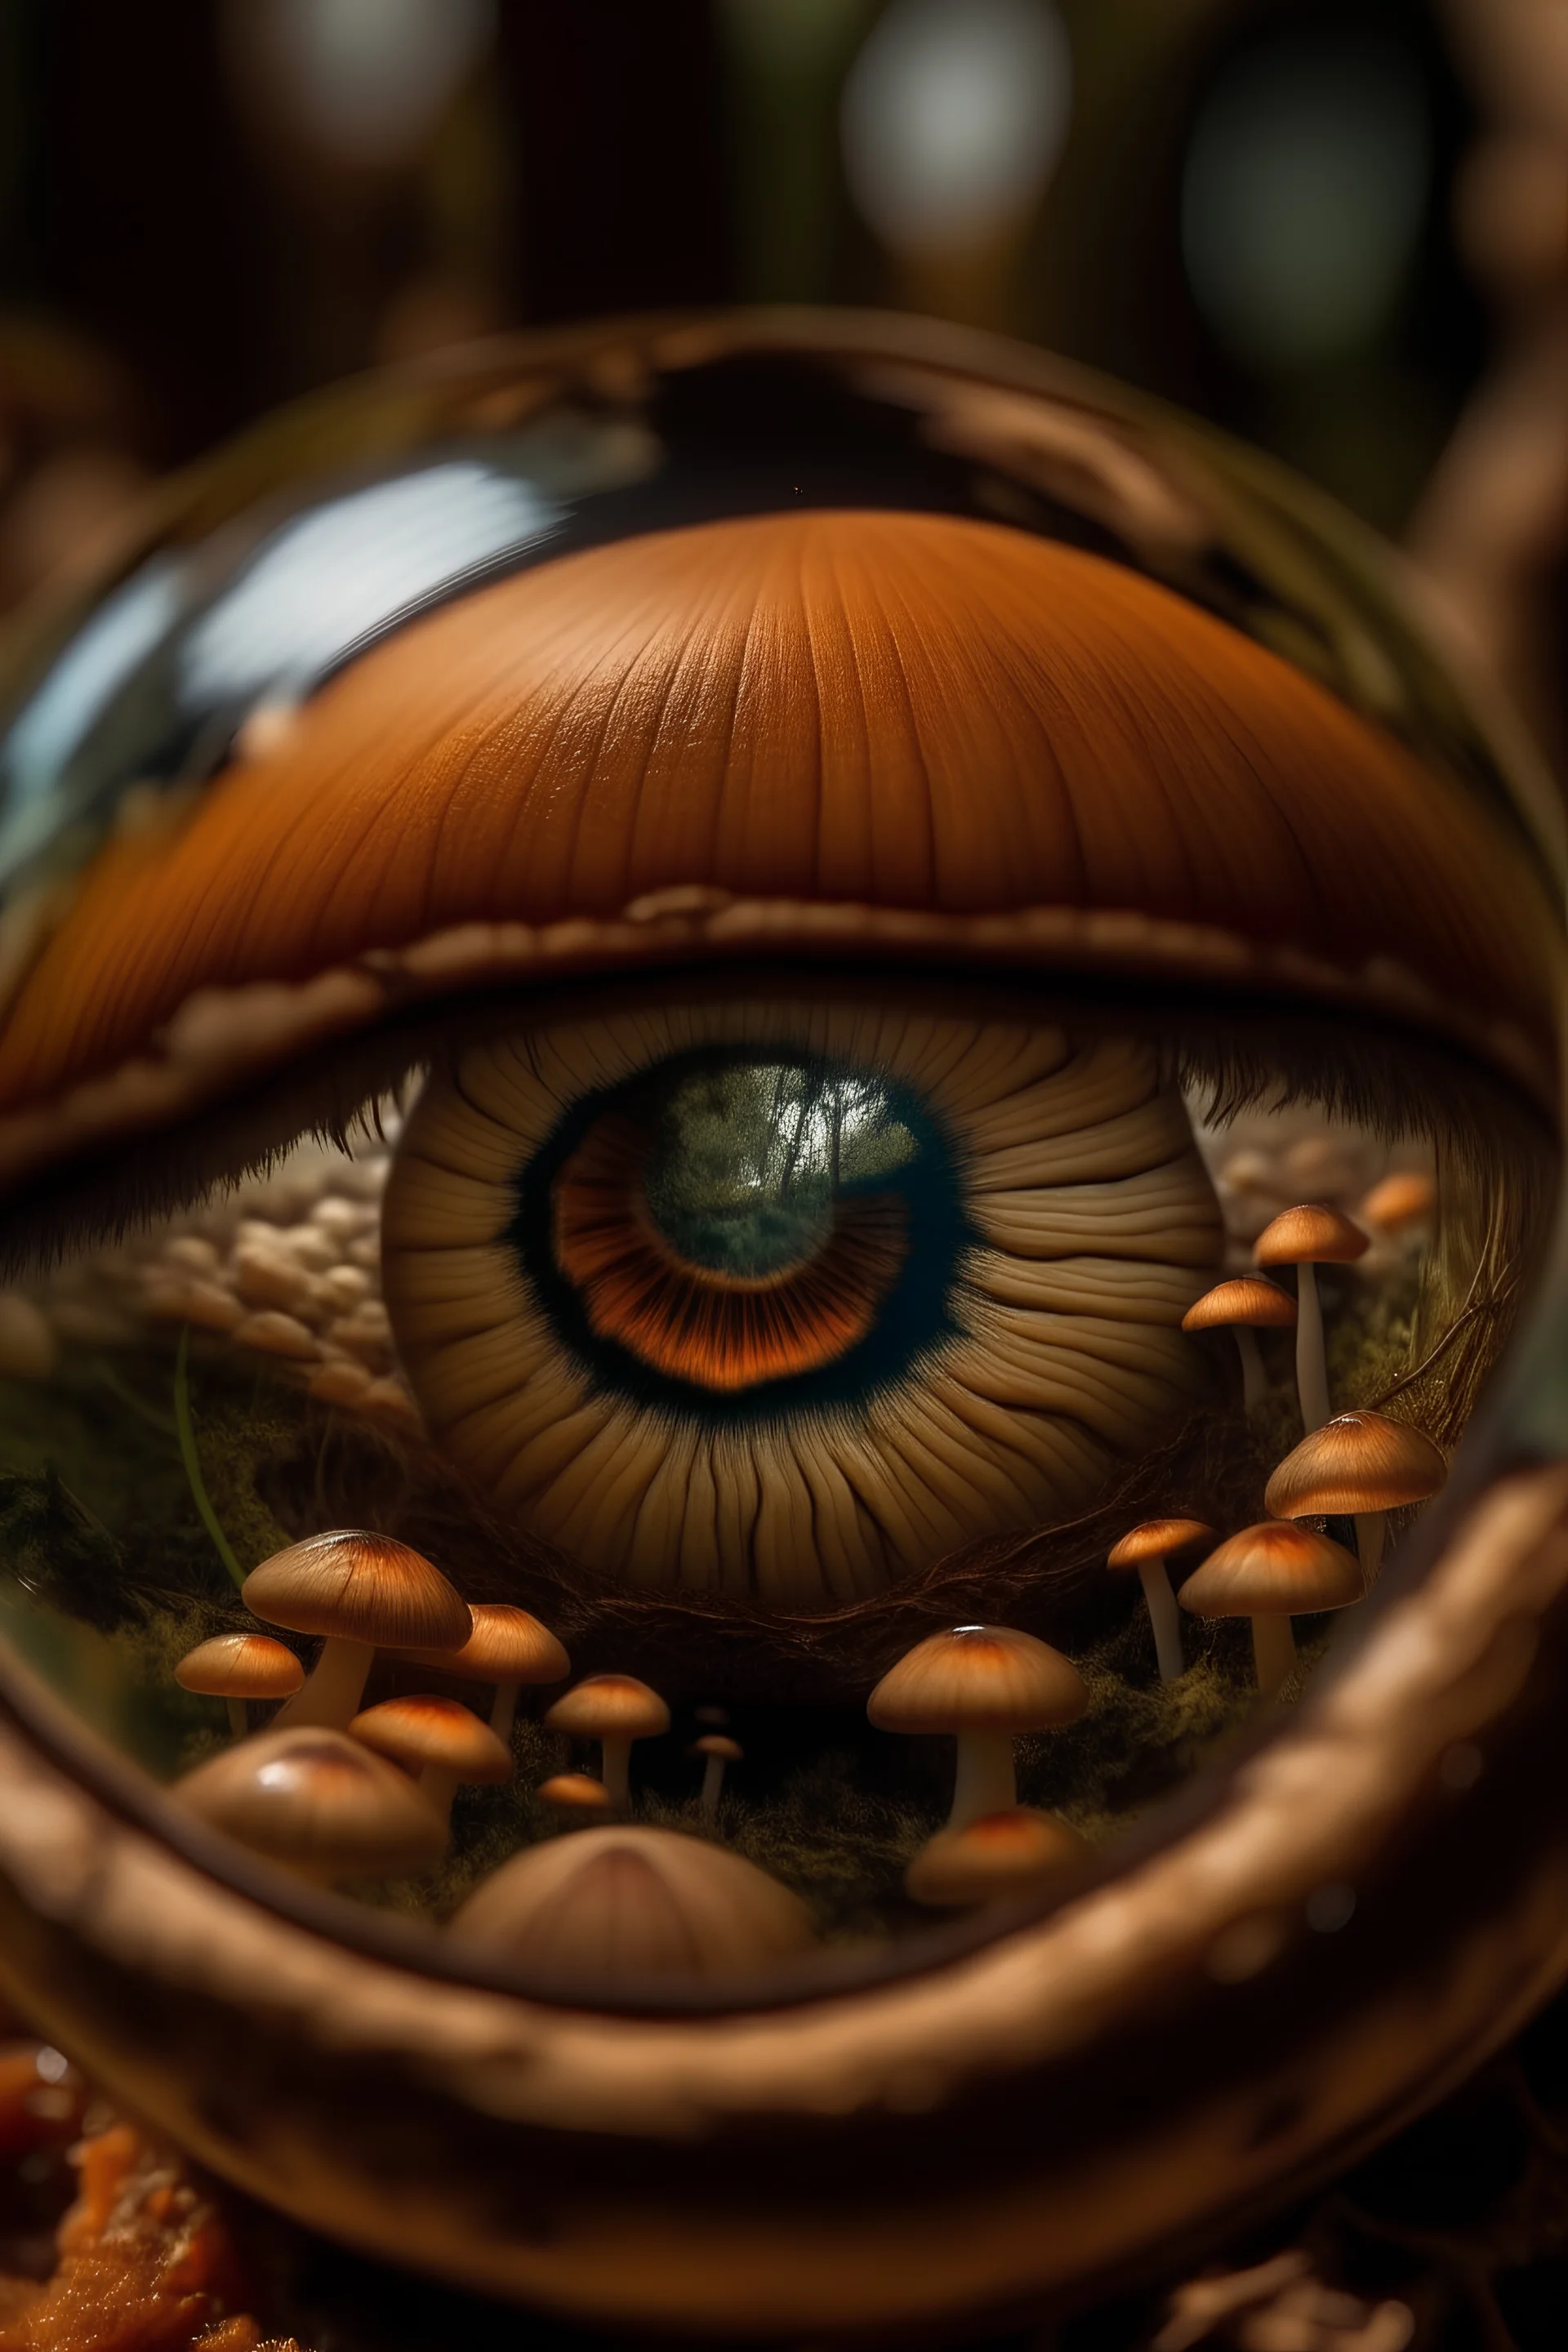 reflection within eye of a forest of mushrooms